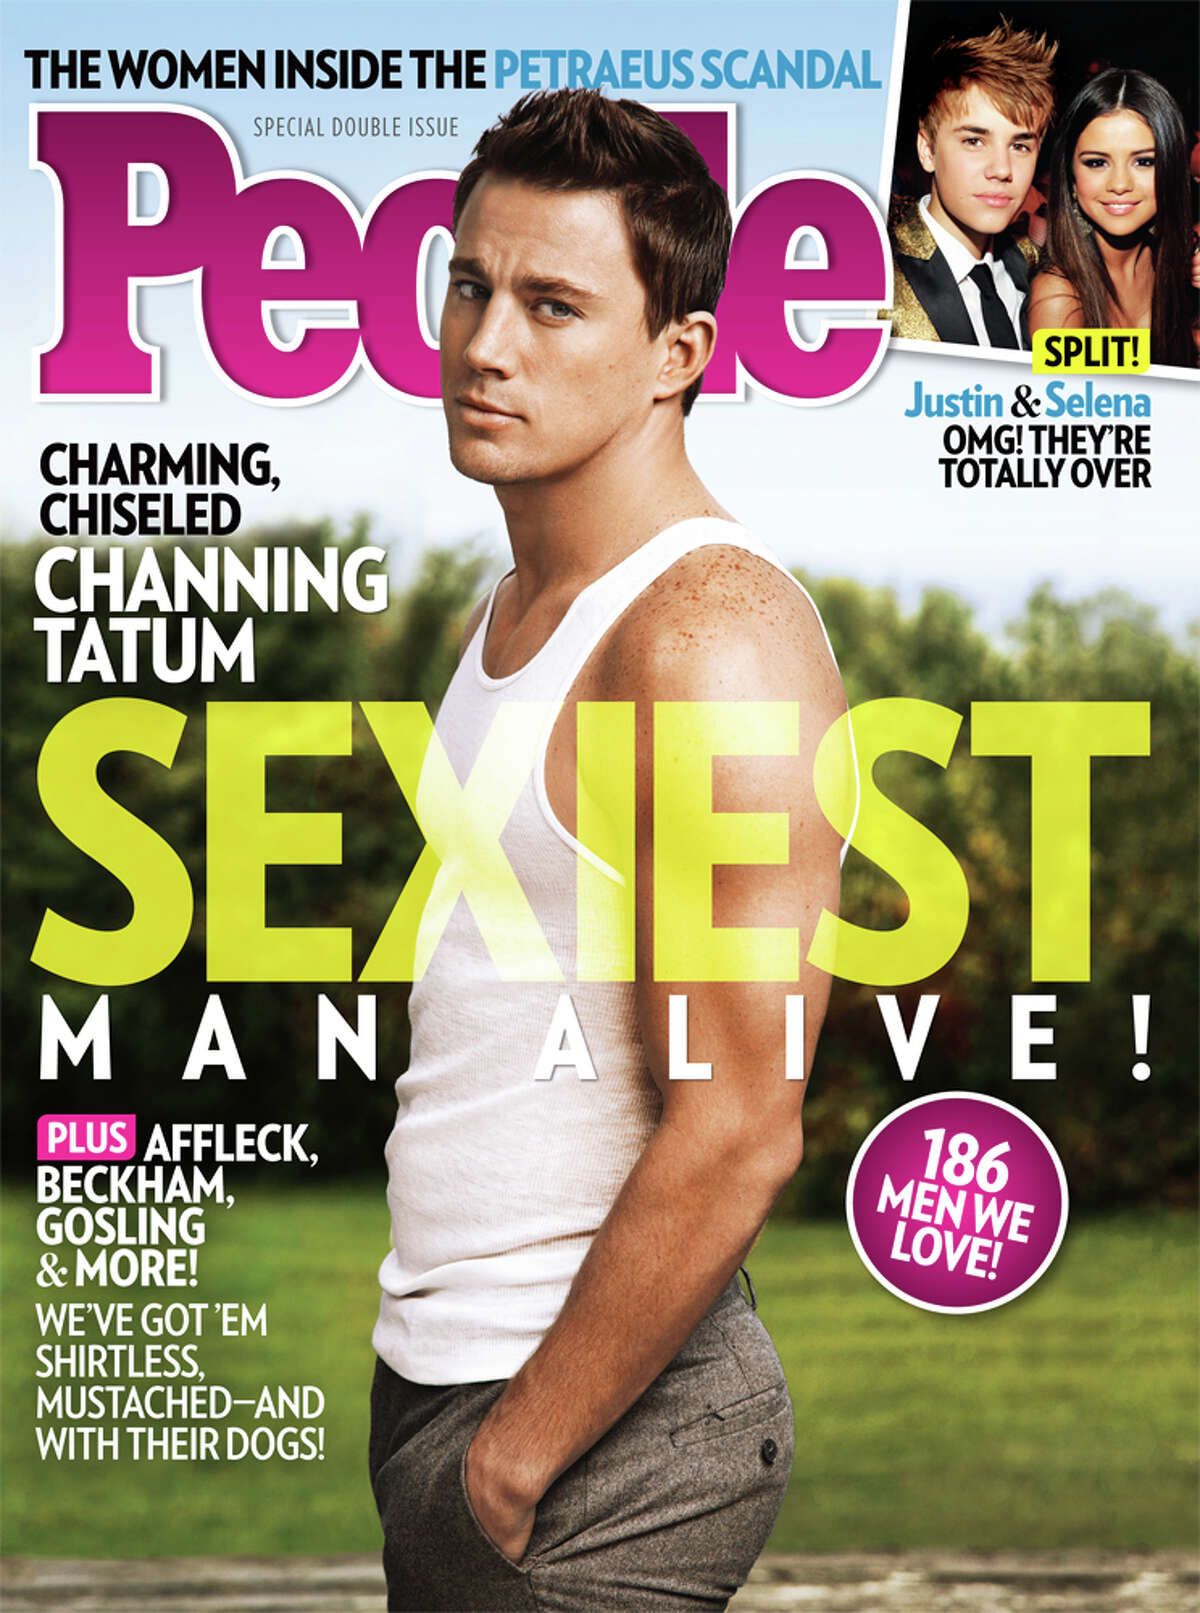 This magazine cover image released Wednesday, Nov. 14, 2012, by People shows actor Channing Tatum on the cover of People's Sexiest Man Alive special double issue. (AP Photo/People)